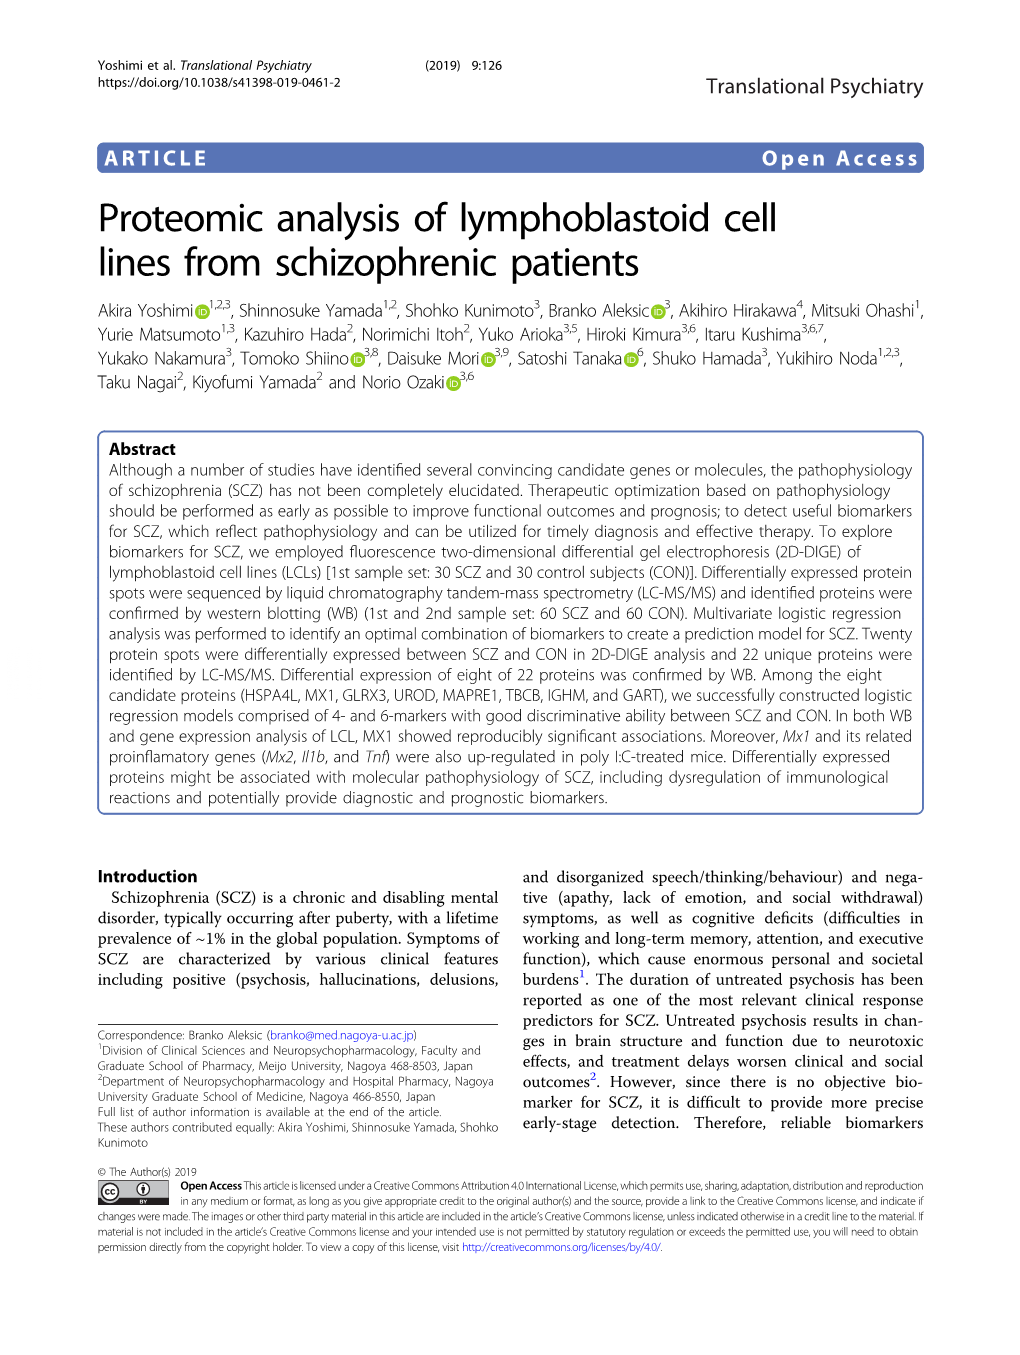 Proteomic Analysis of Lymphoblastoid Cell Lines from Schizophrenic Patients